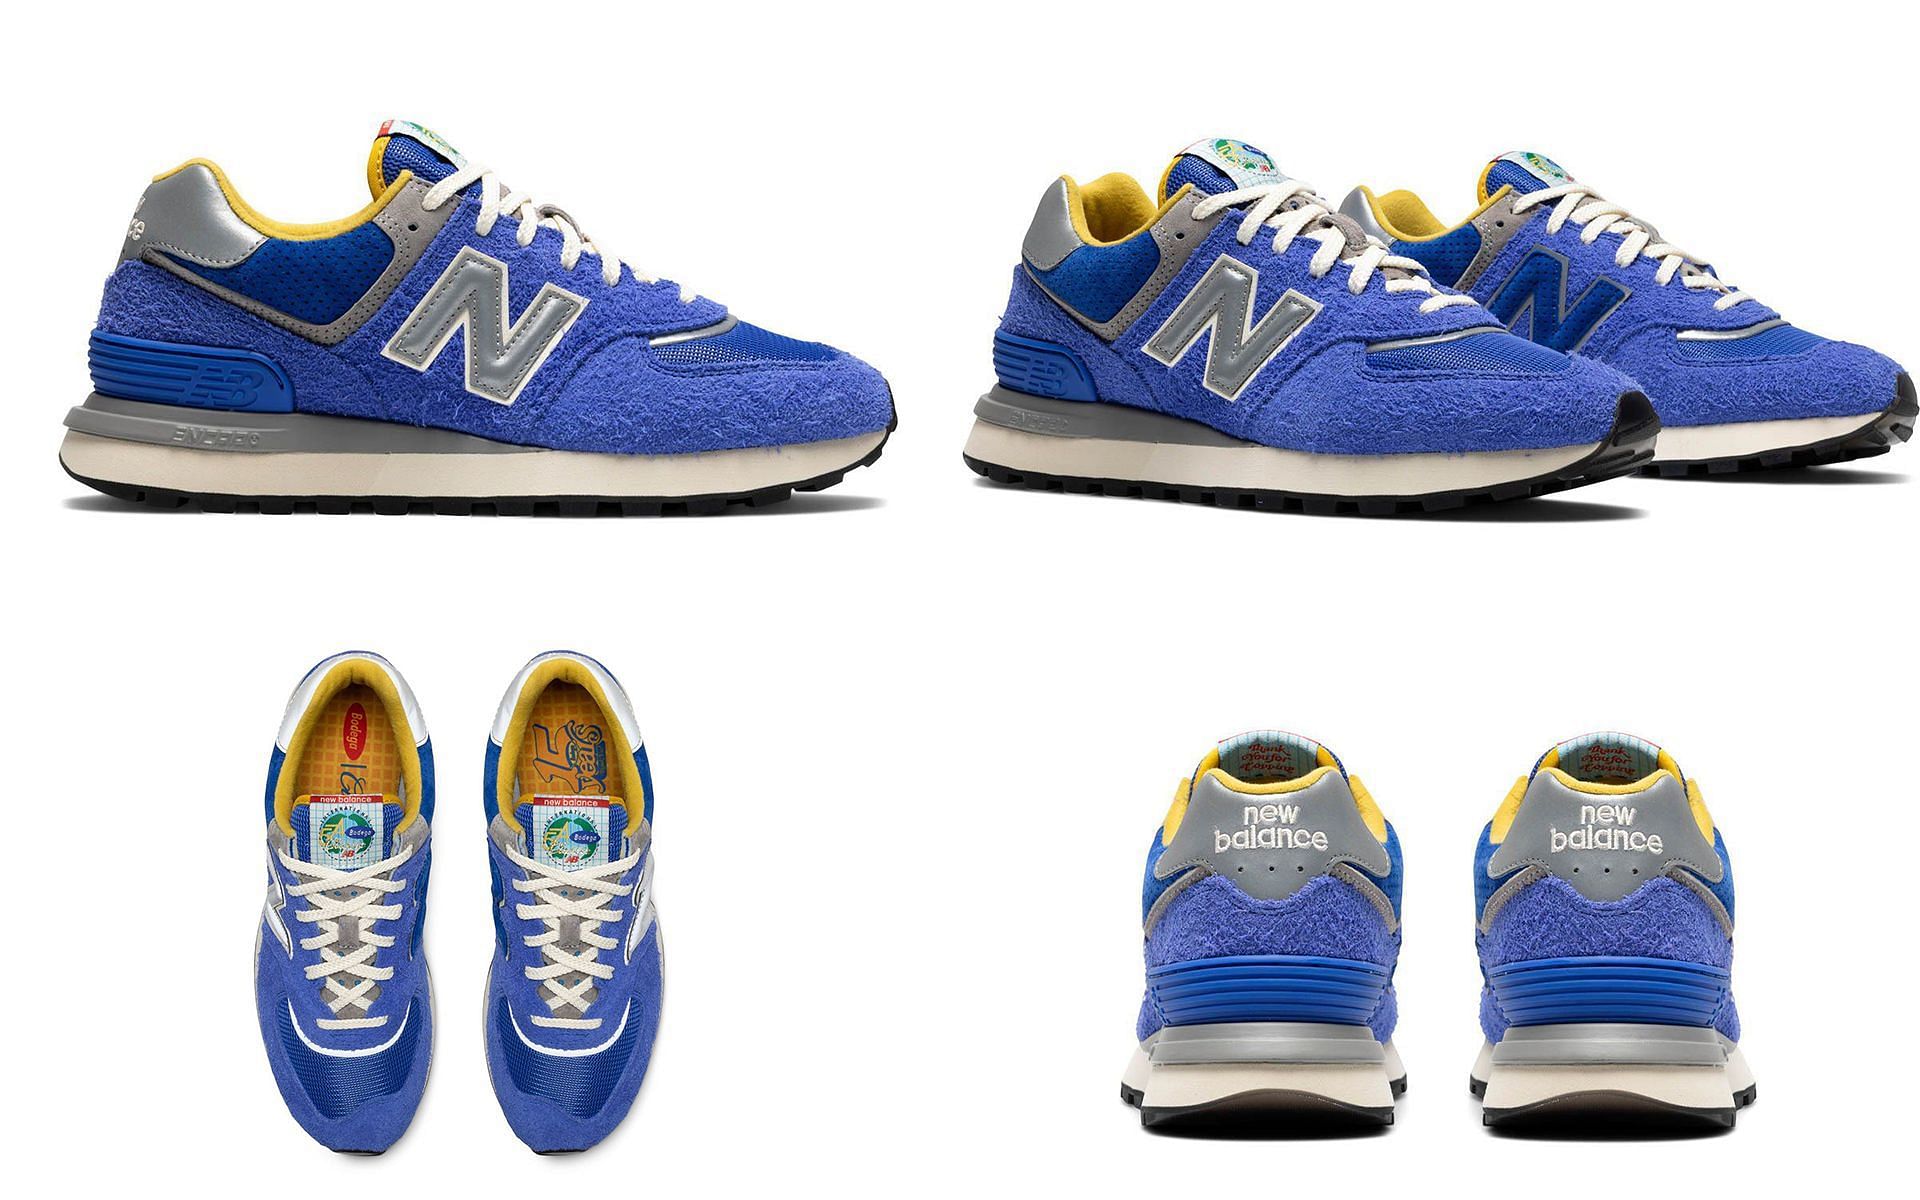 Take a detailed look at the impending Bodega x New Balance 574 Departure colorway (Image via Sportskeeda)